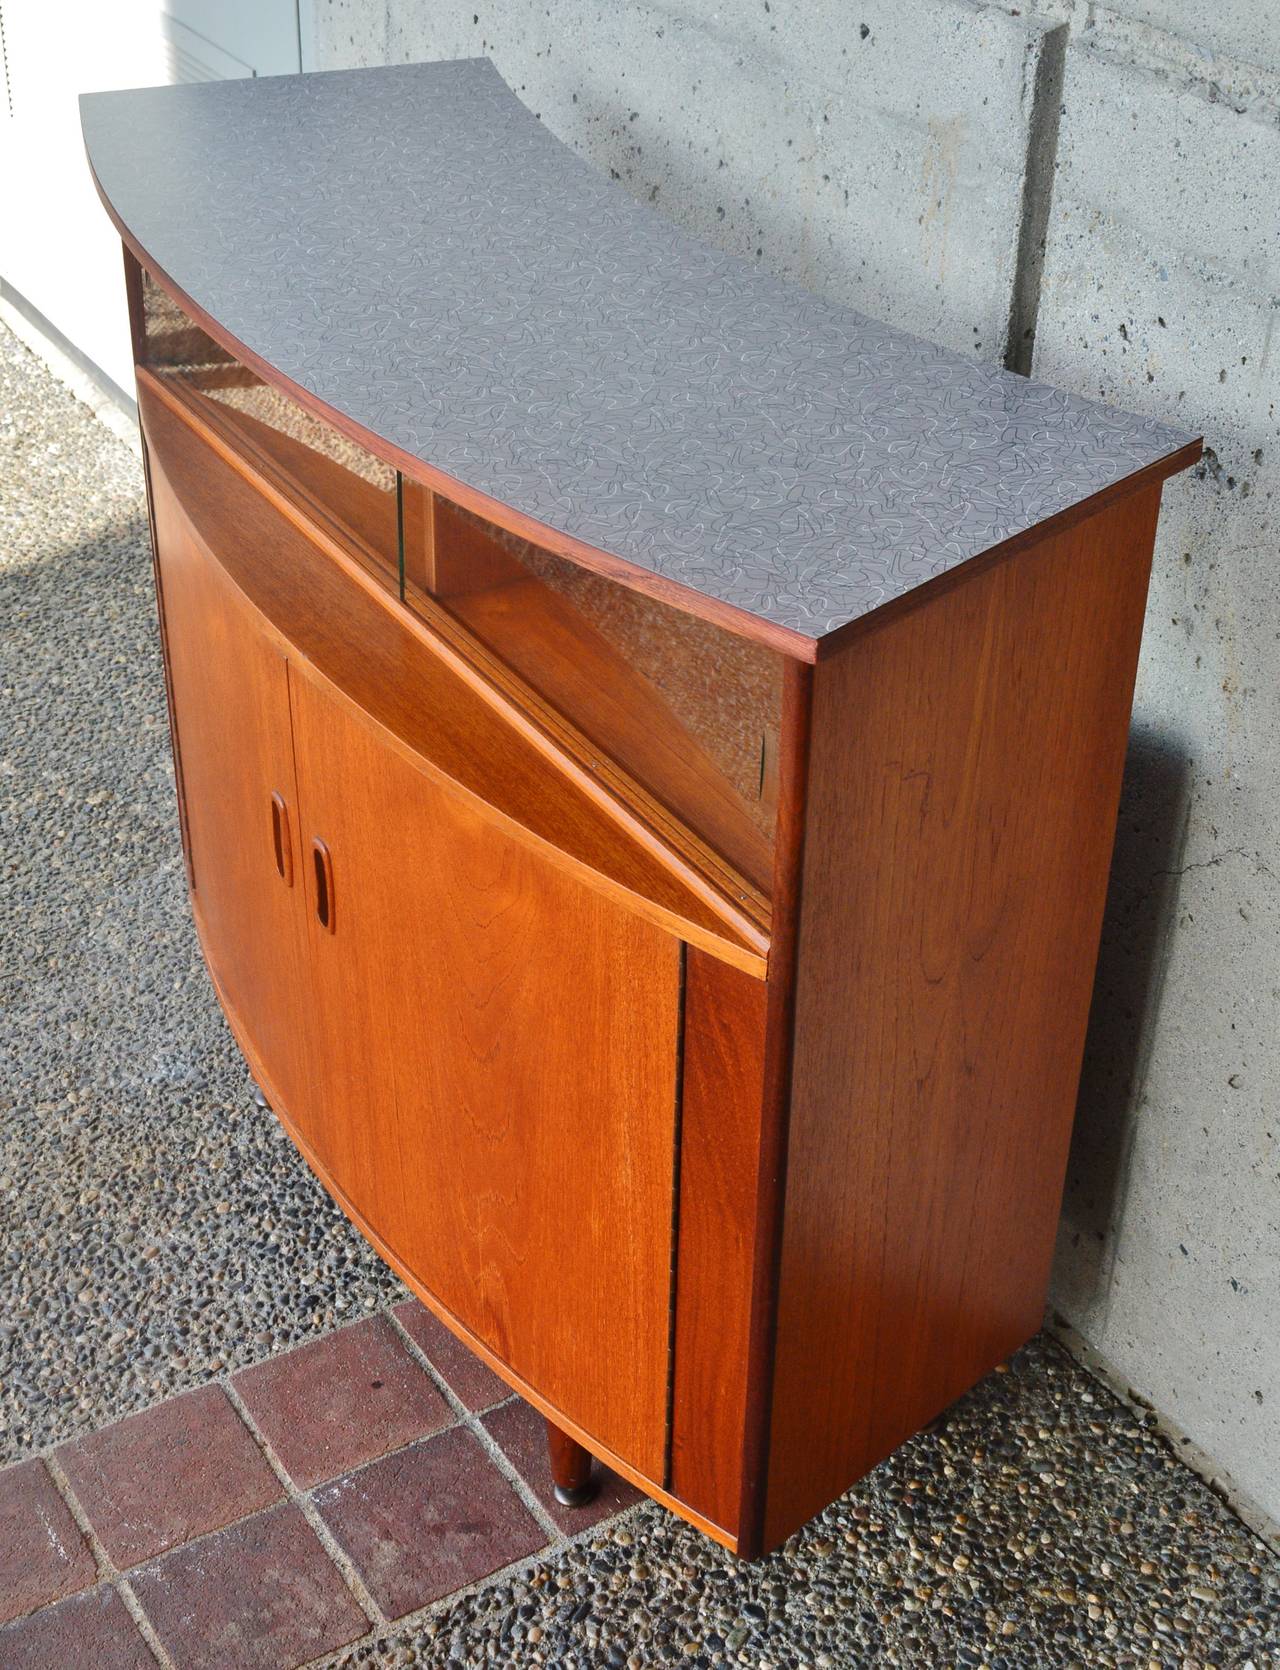 This is a totally cool and unique Danish Modern teak bar! Featuring a bow-front profile, where the front doors and bar top are curved outwards, and the back of the bar top curves inwards. The top was damaged formica, so we replaced it with new